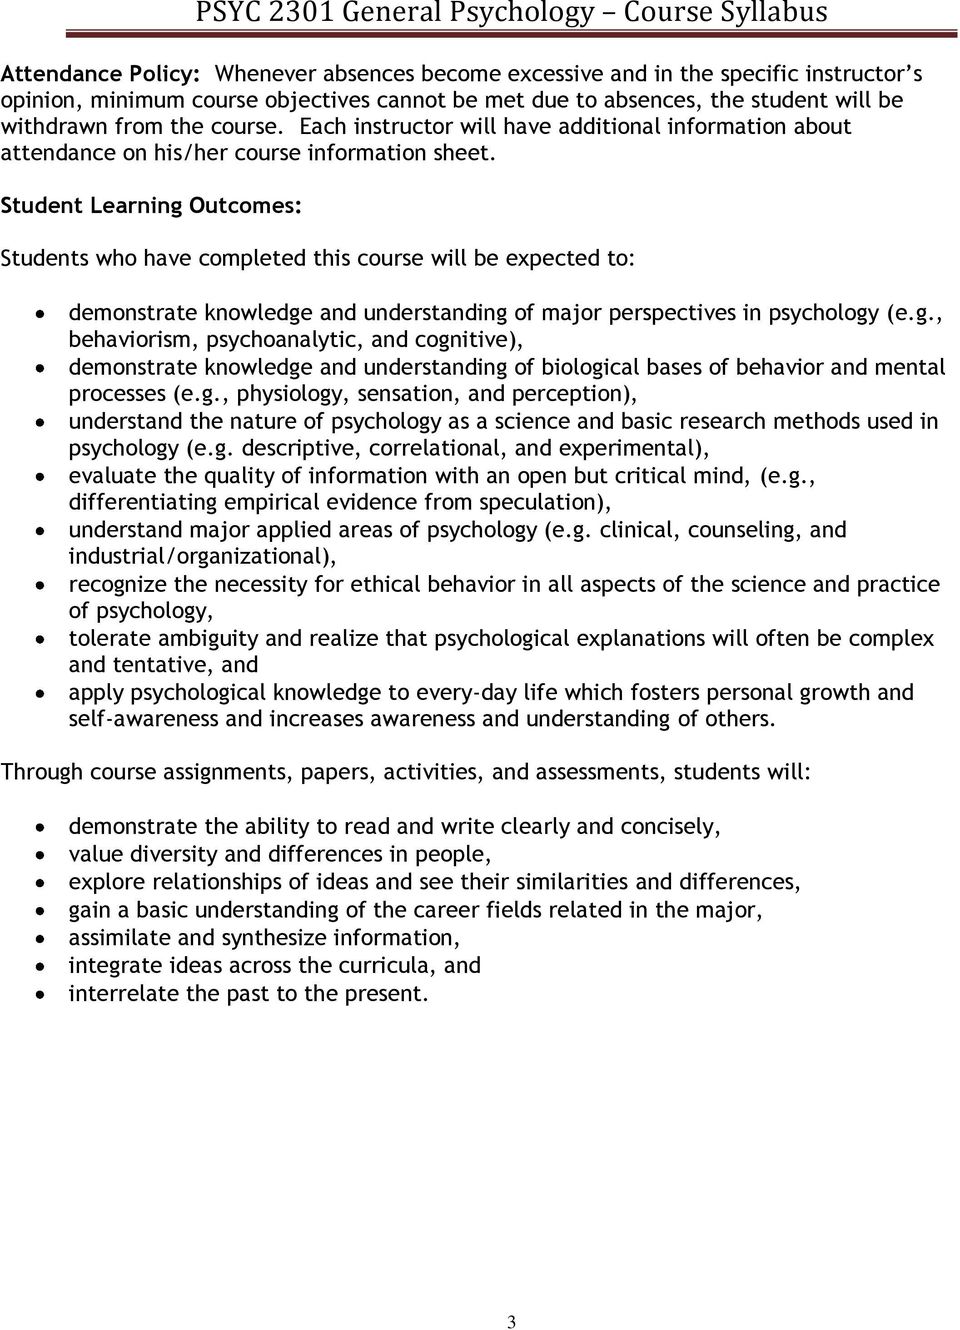 Student Learning Outcomes: Students who have completed this course will be expected to: demonstrate knowledge and understanding of major perspectives in psychology (e.g., behaviorism, psychoanalytic, and cognitive), demonstrate knowledge and understanding of biological bases of behavior and mental processes (e.